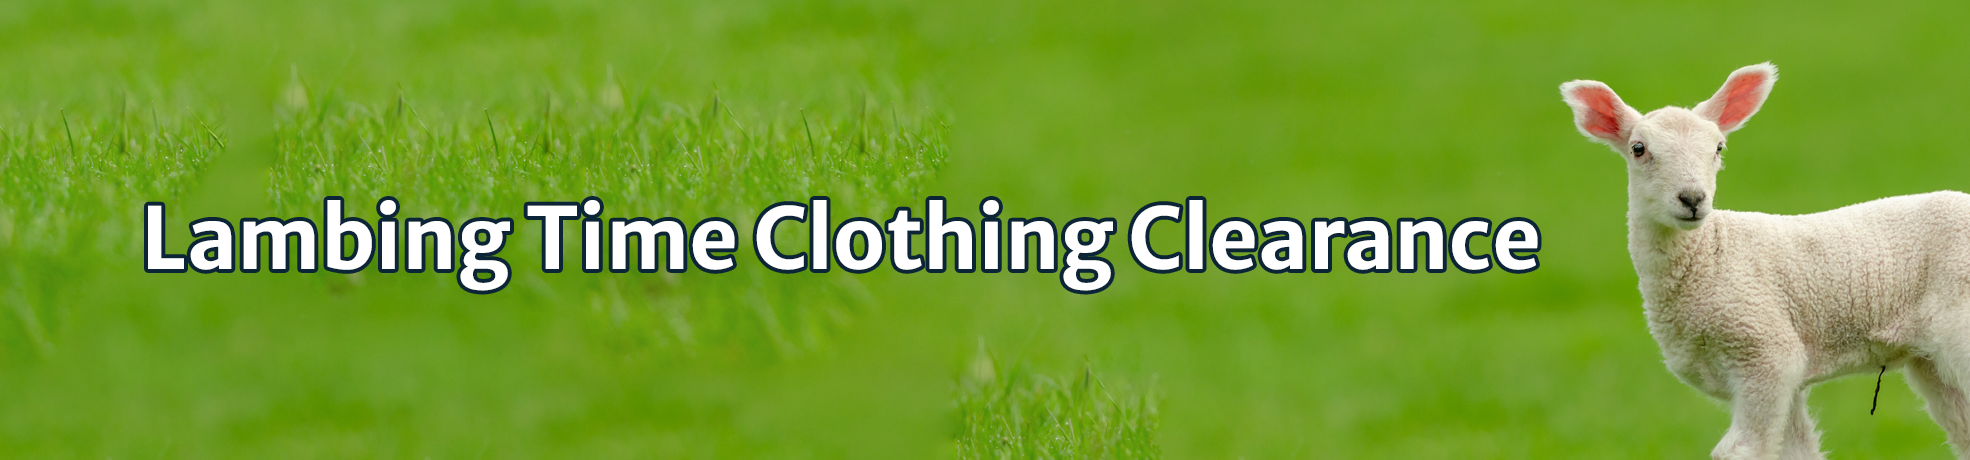 Lambing Time Clothing Clearance